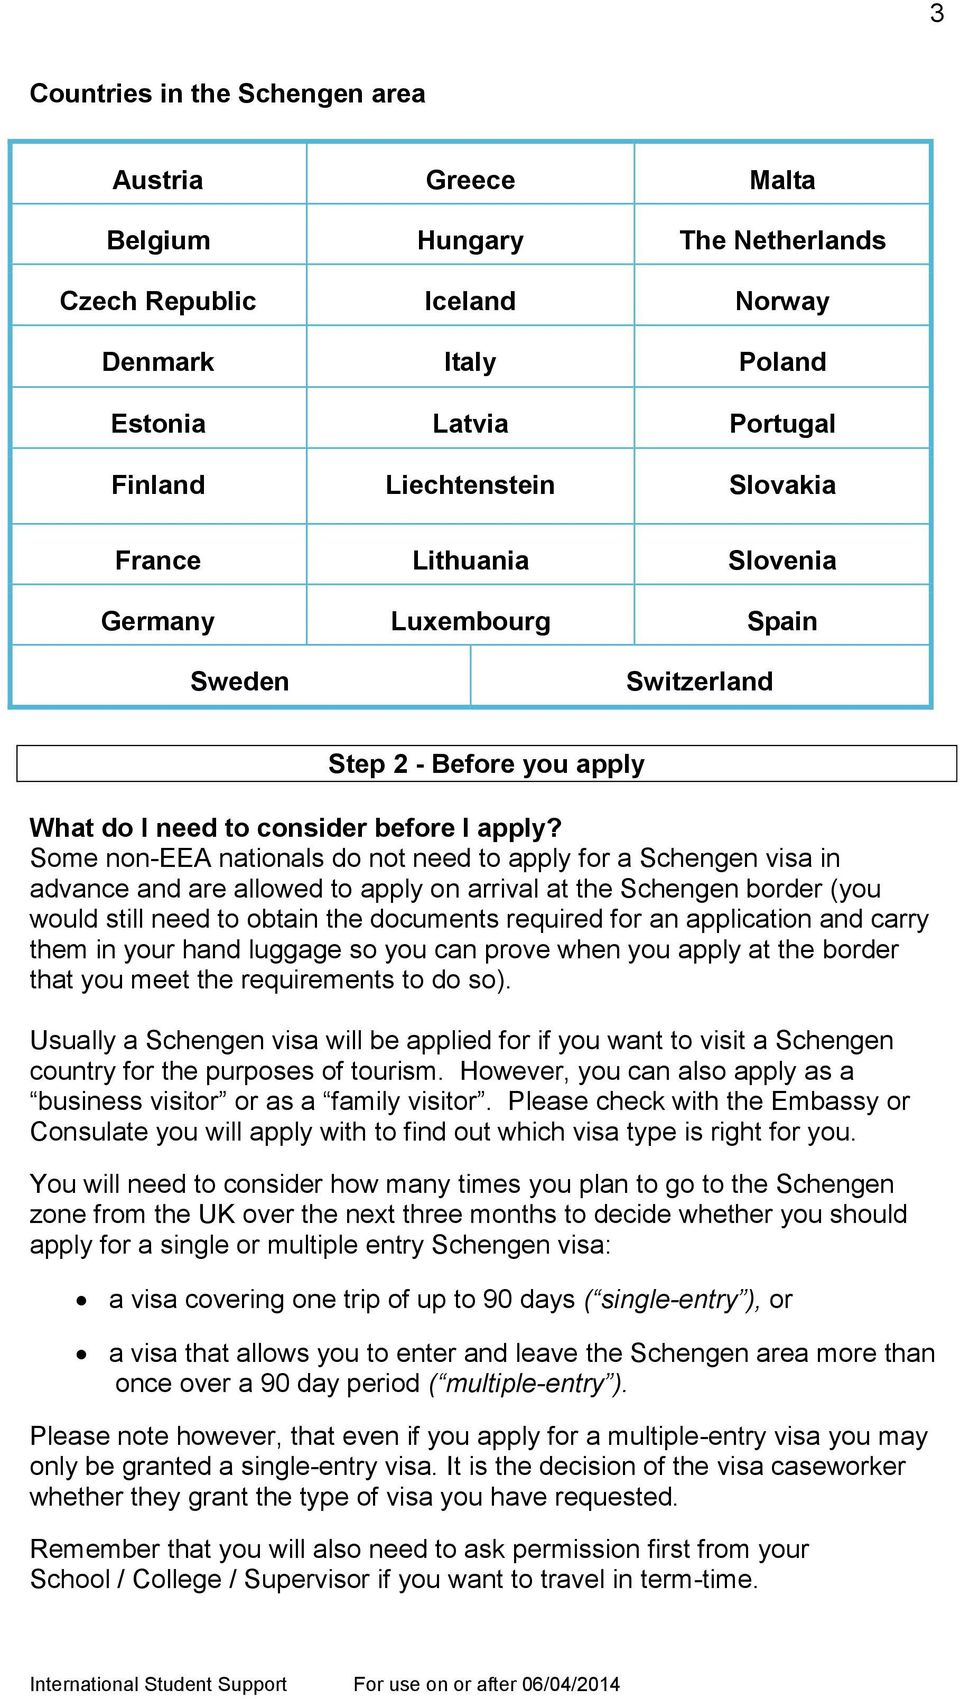 Some non-eea nationals do not need to apply for a Schengen visa in advance and are allowed to apply on arrival at the Schengen border (you would still need to obtain the documents required for an